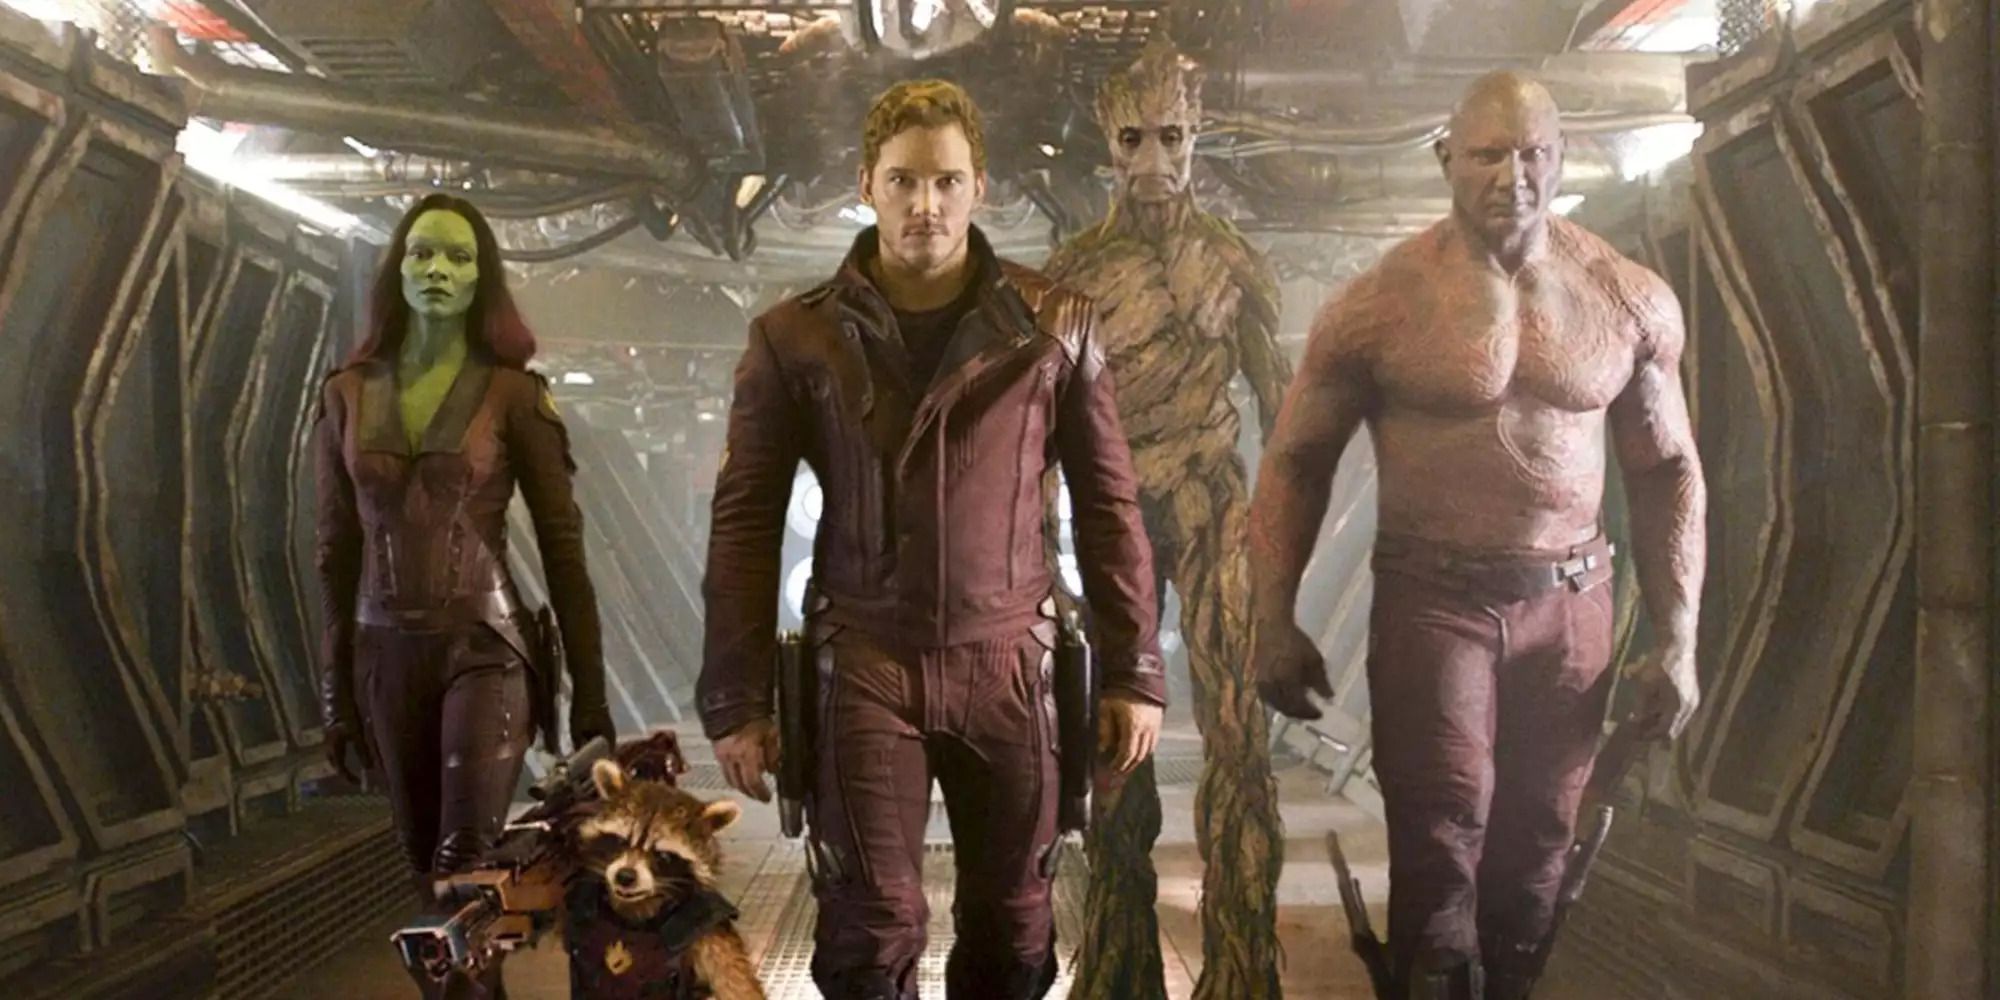 The guardians in their red uniform from 'Guardians of the Galaxy'